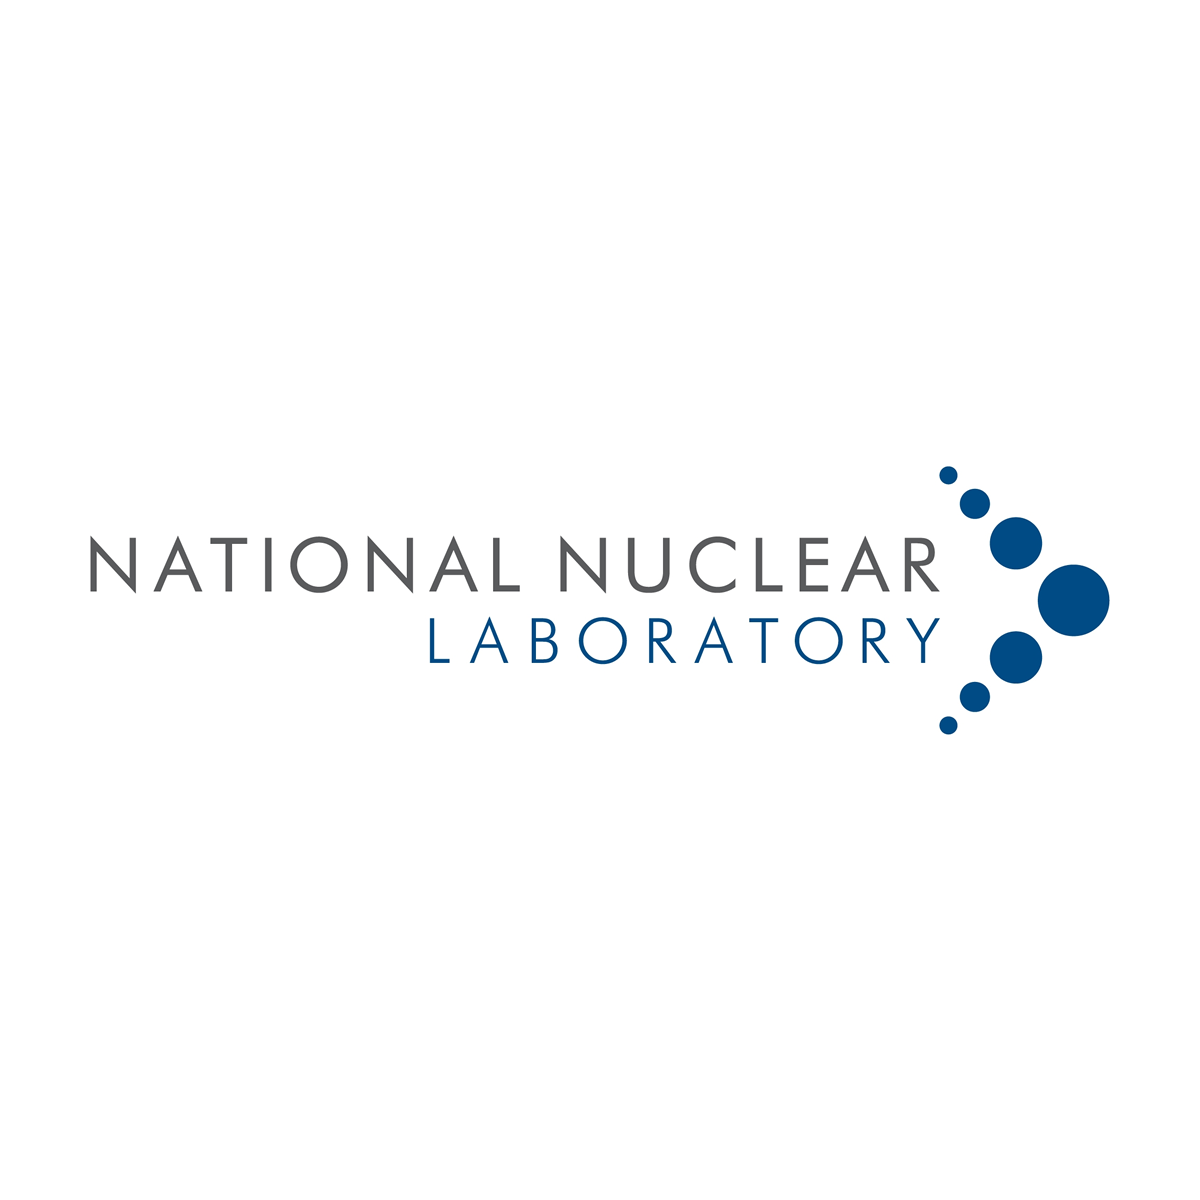 Jobs and careers with National Nuclear Laboratory